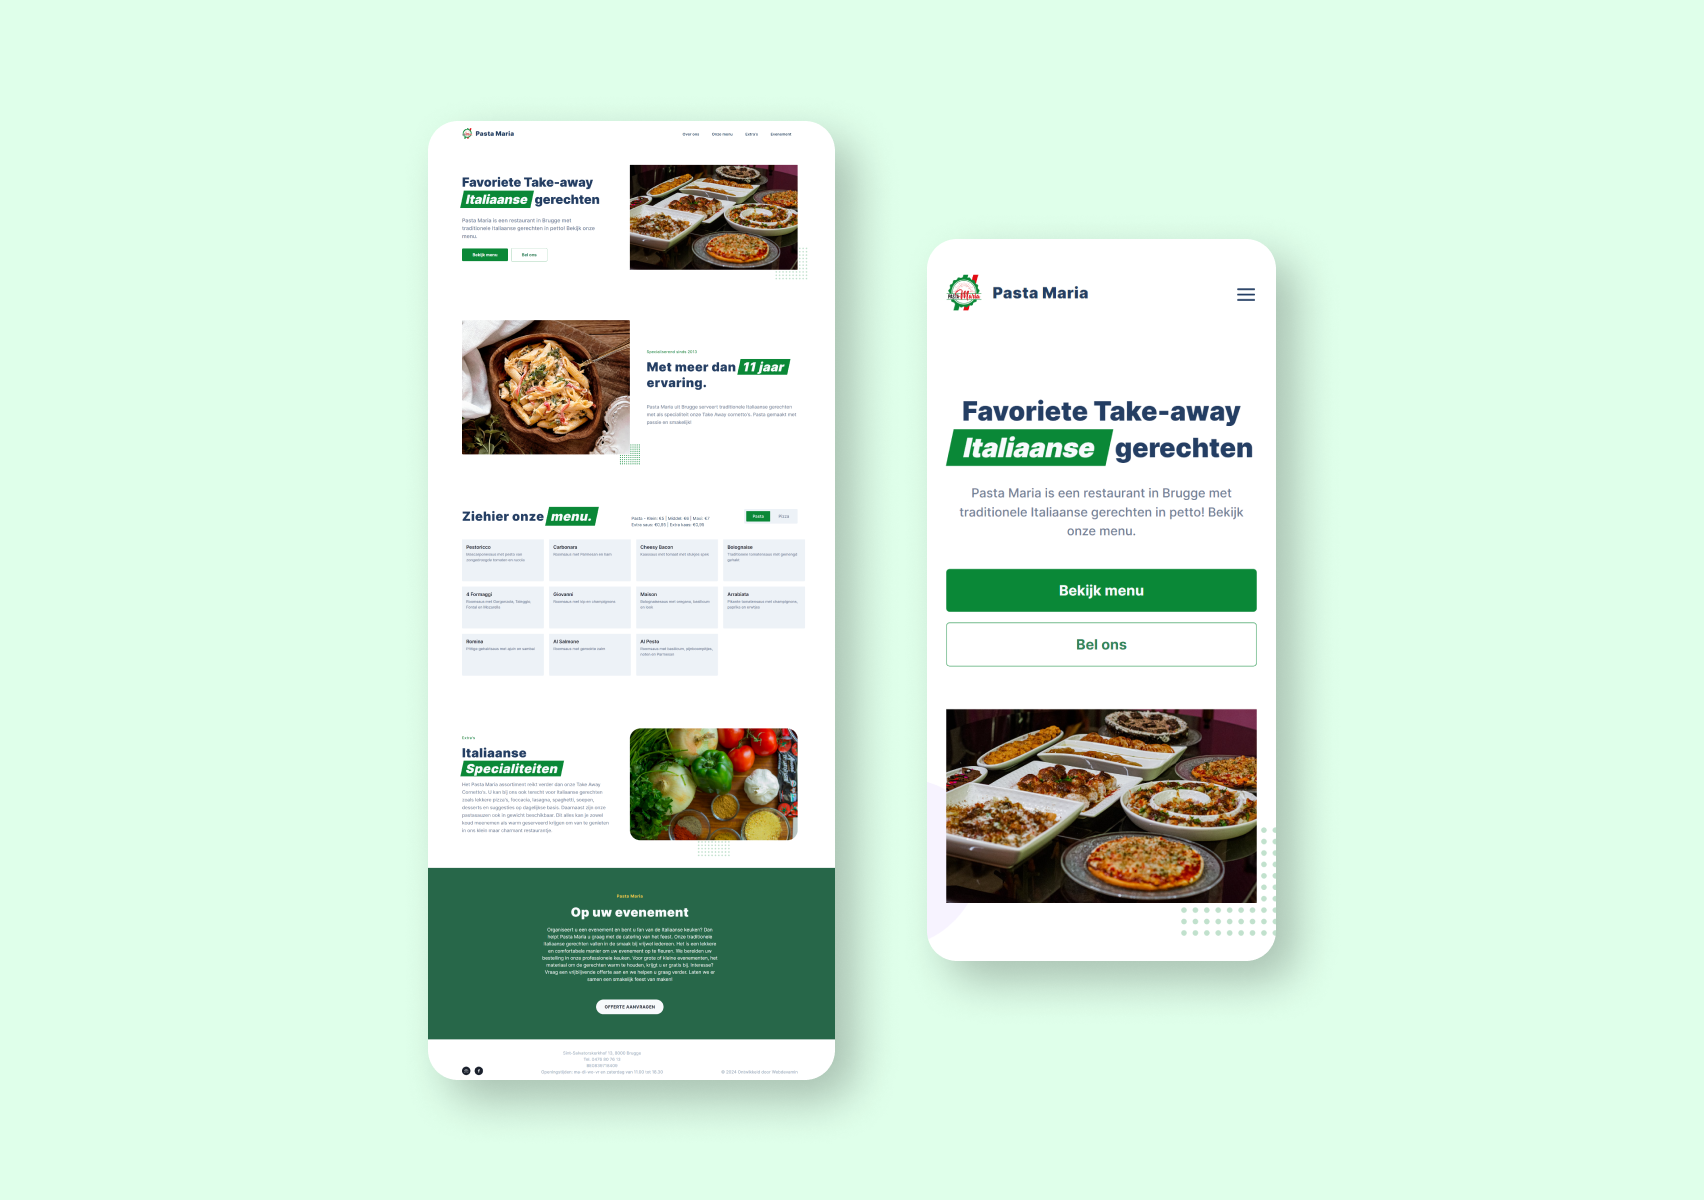 A landing page of the Pasta Maria website, visible on both desktop and mobile views.